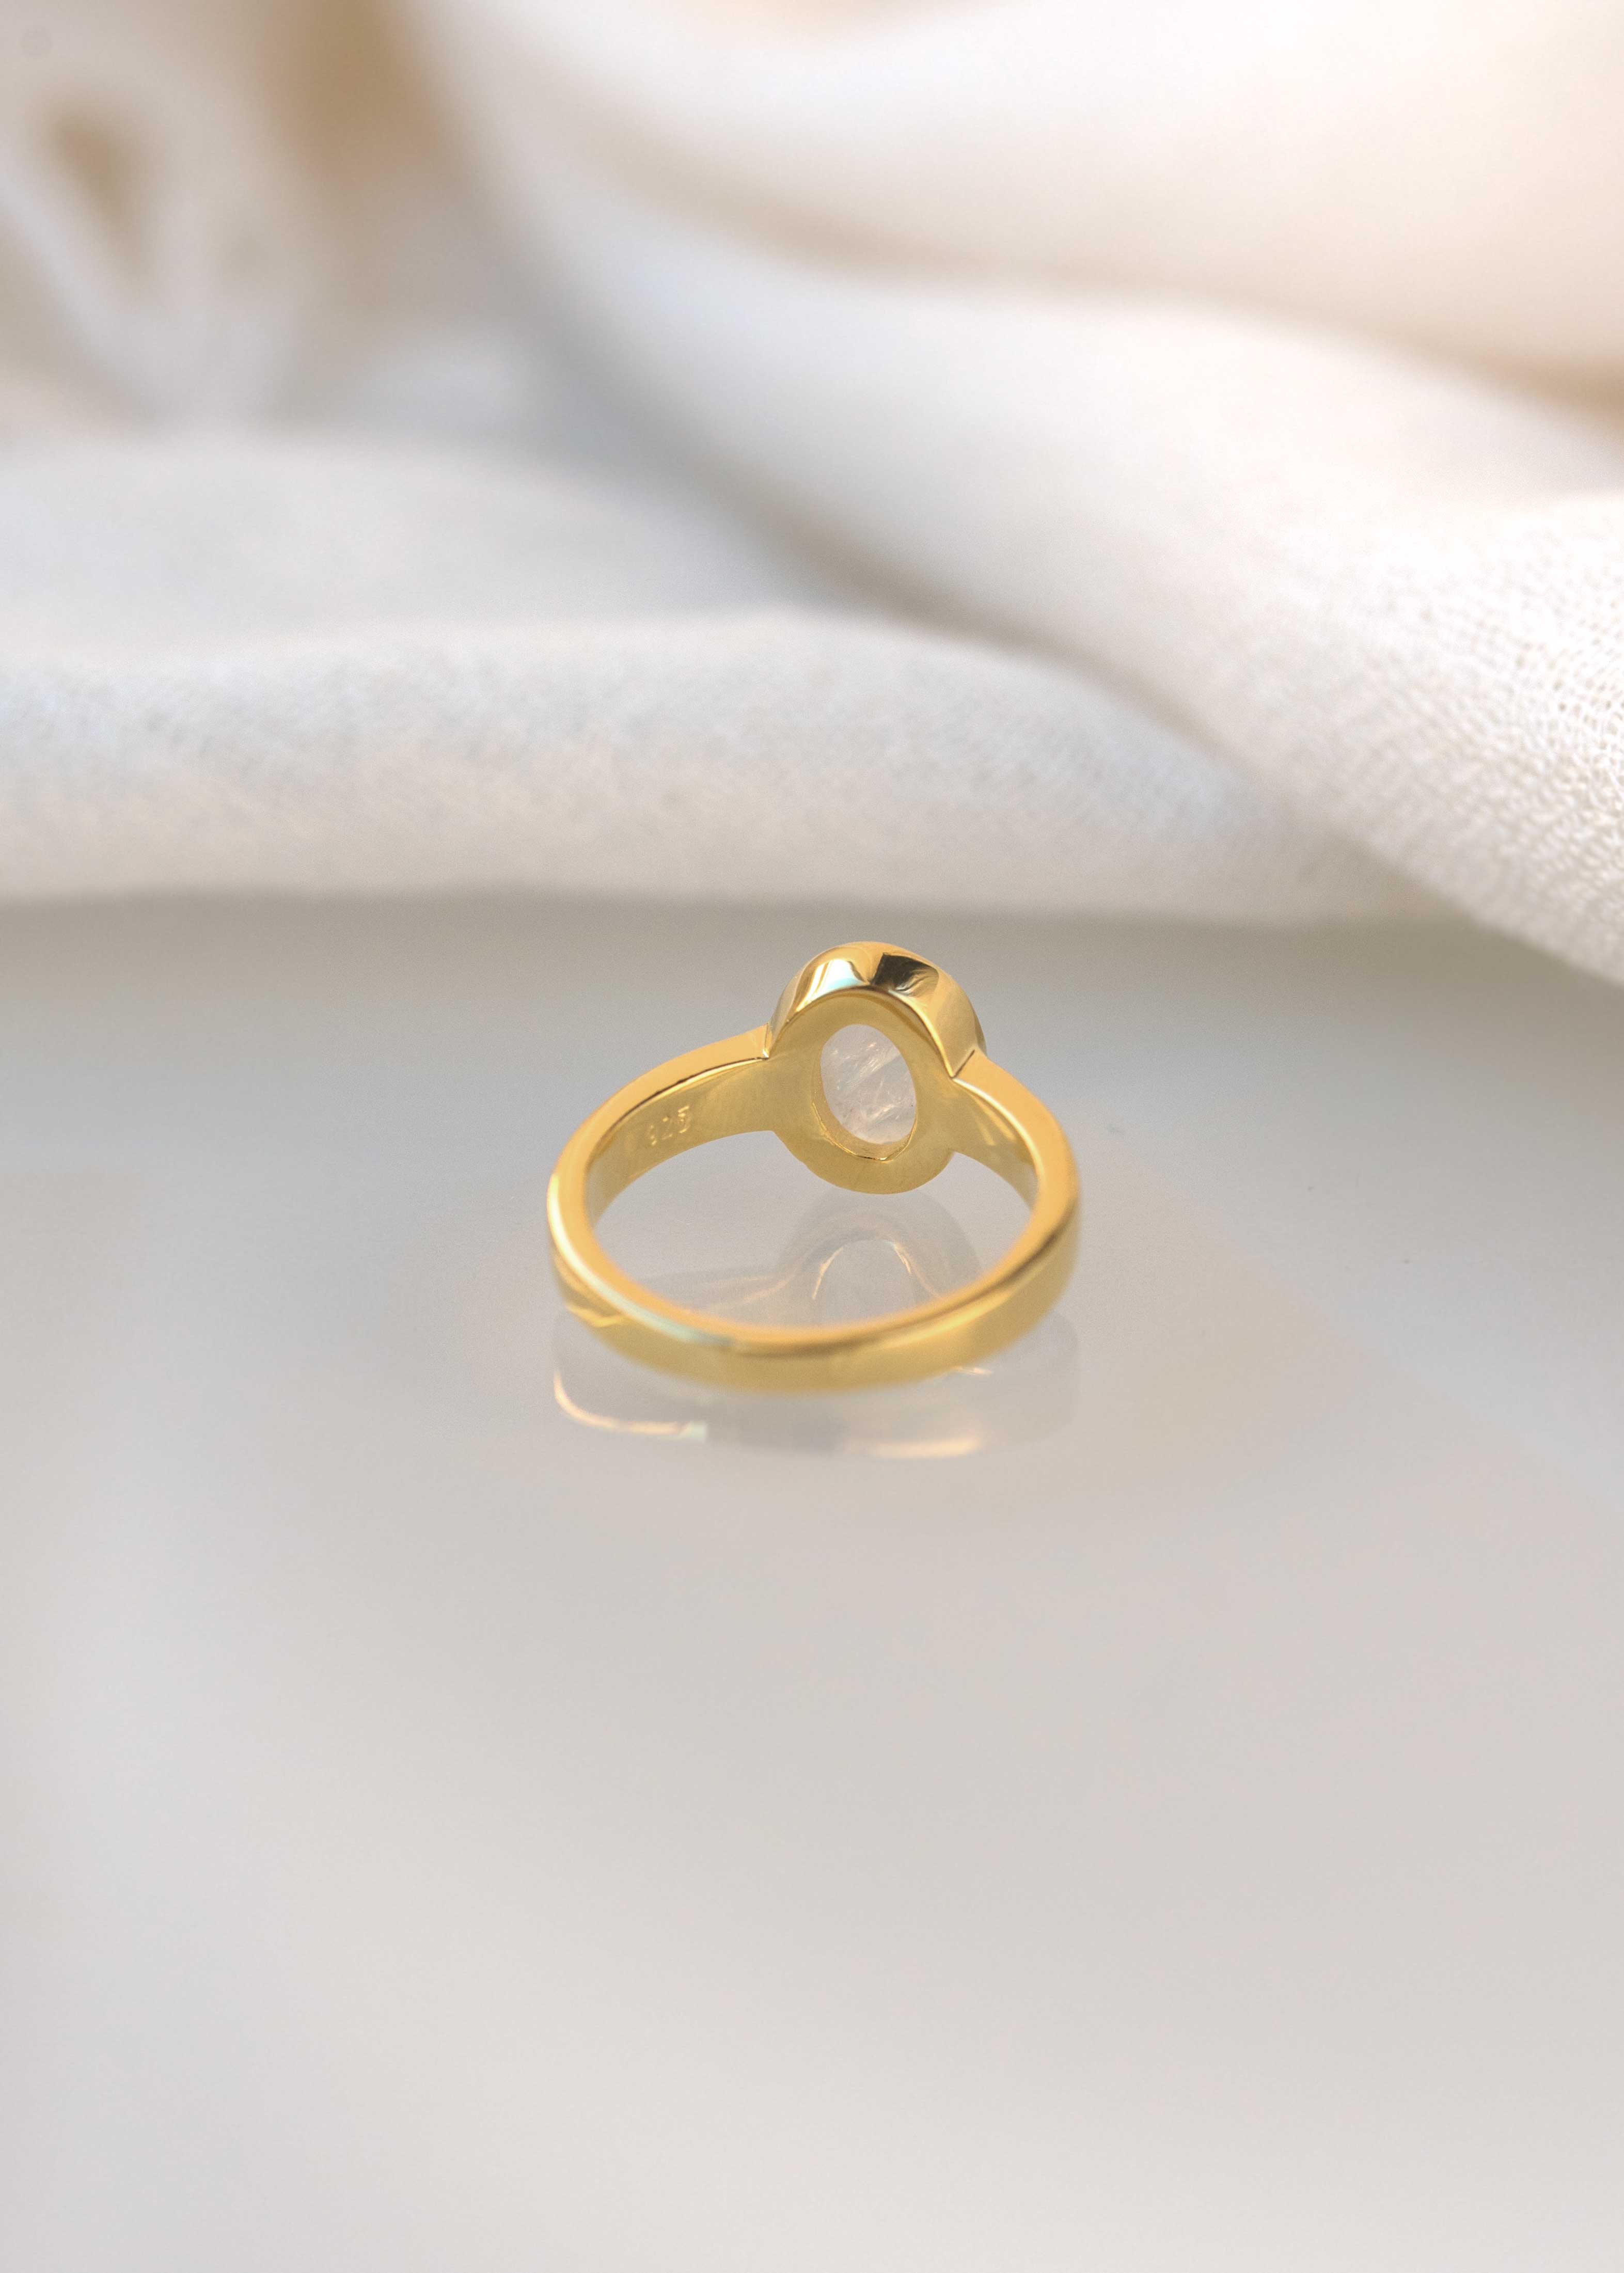 moonstone ring gold small delicate promise ring pinky ring